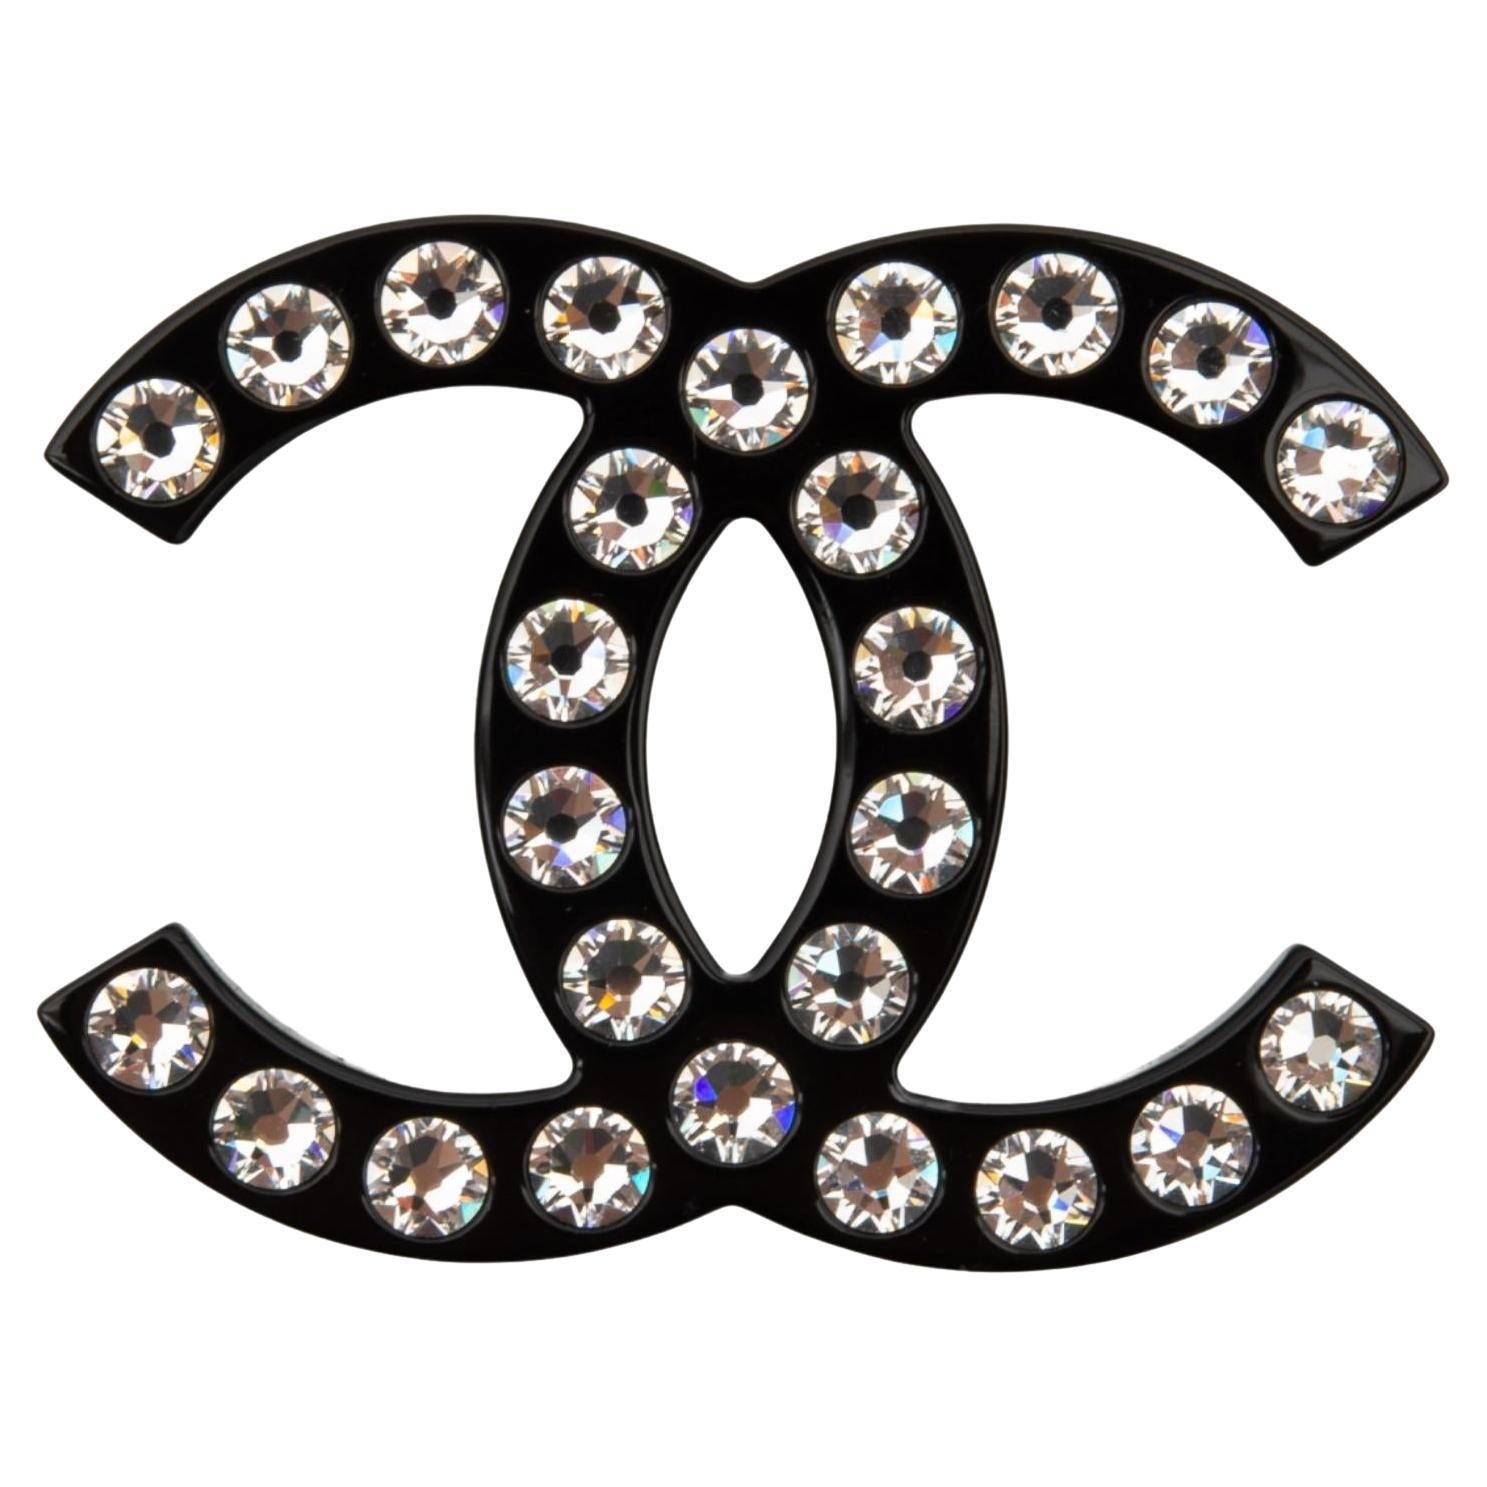 CHANEL Crystal Fashion Brooches for sale